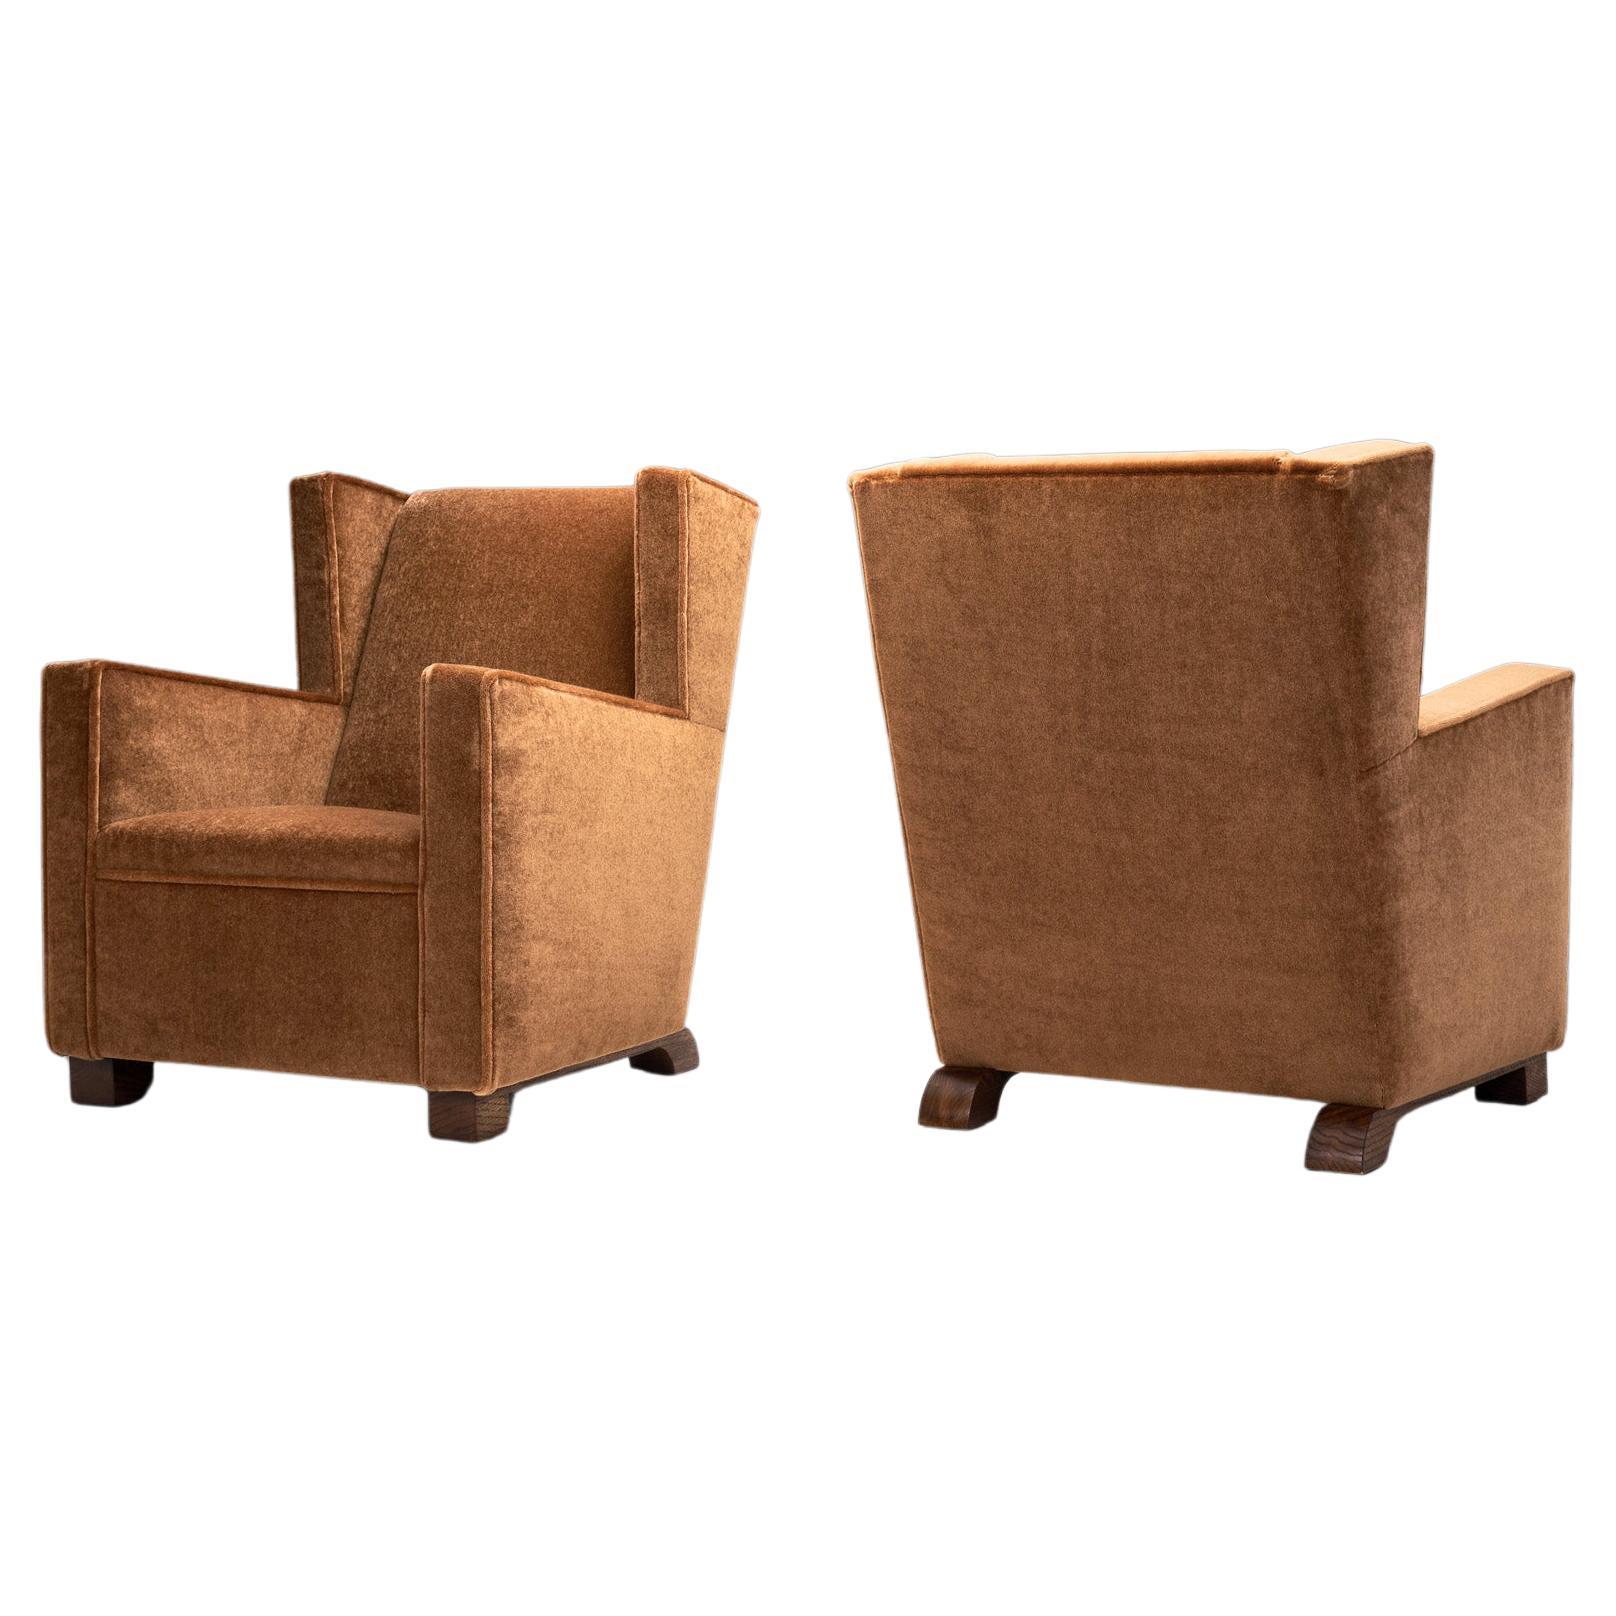 Set of Upholstered Art Deco Armchairs, Europe First Half of 20th Century